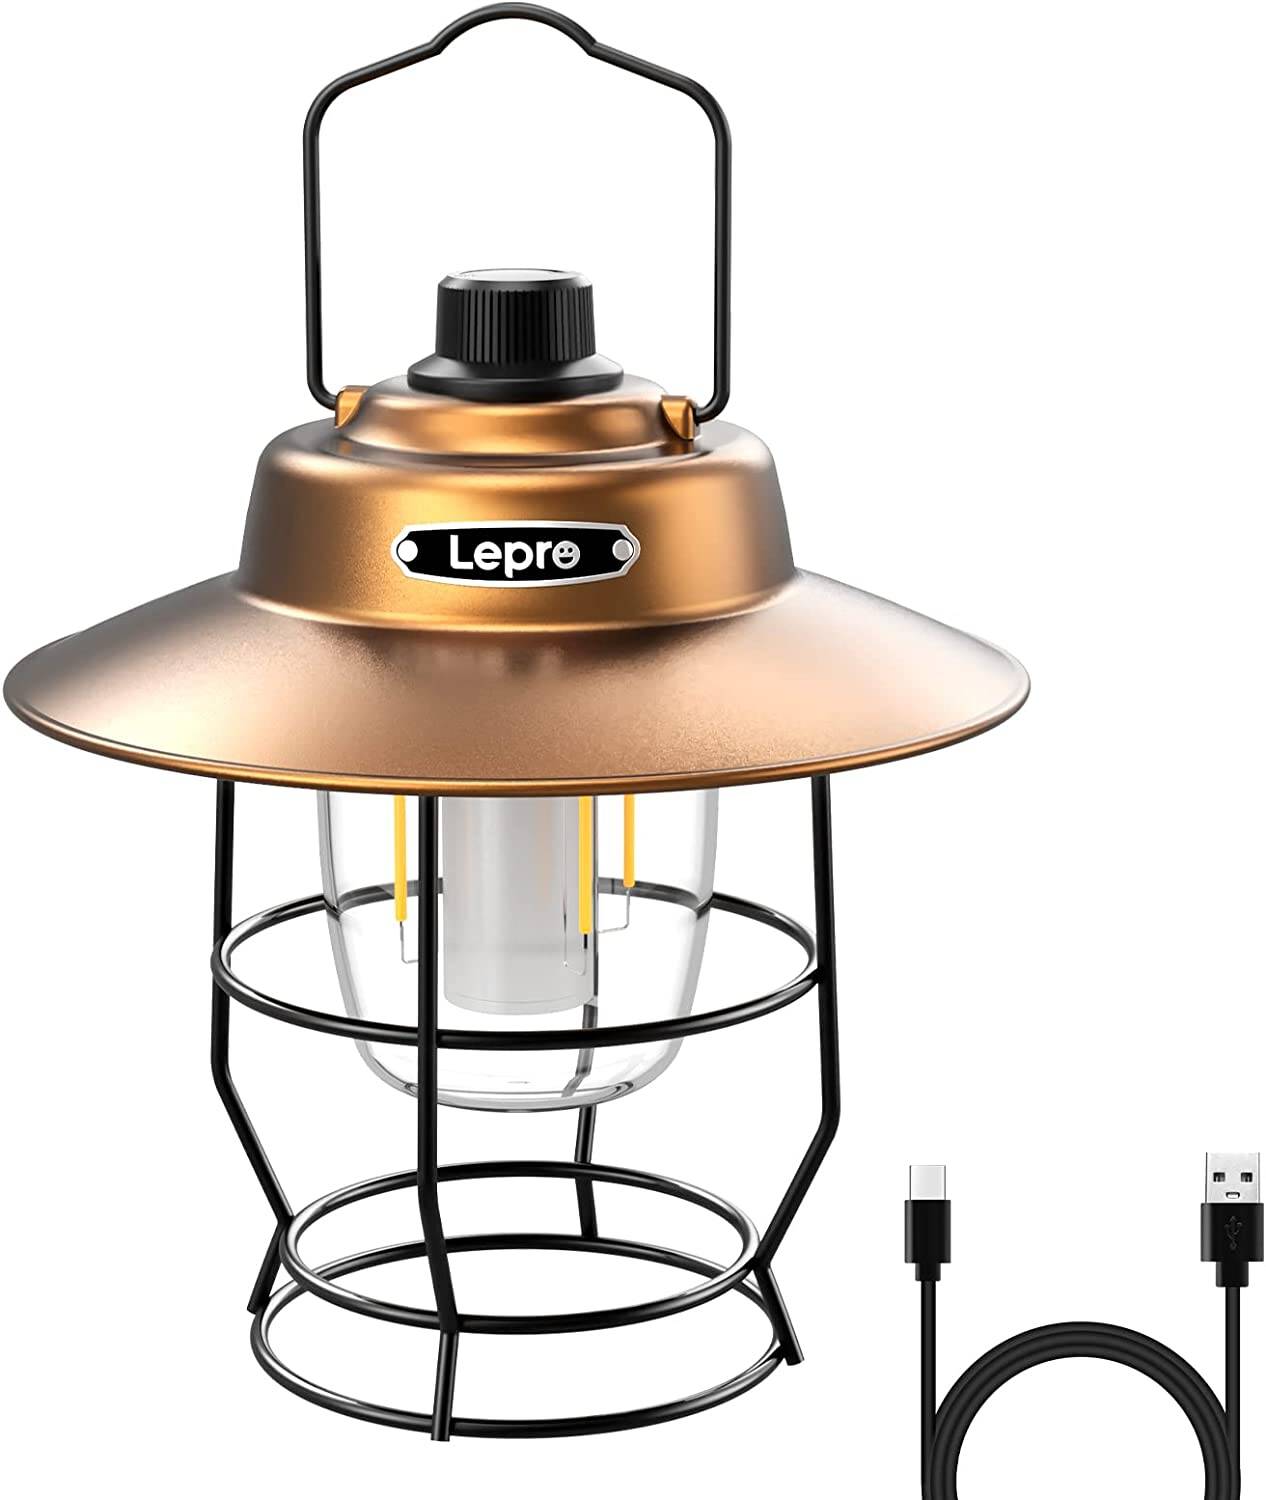 Vintage Led Camping Lantern, Rechargeable Classic Tabletop Lantern